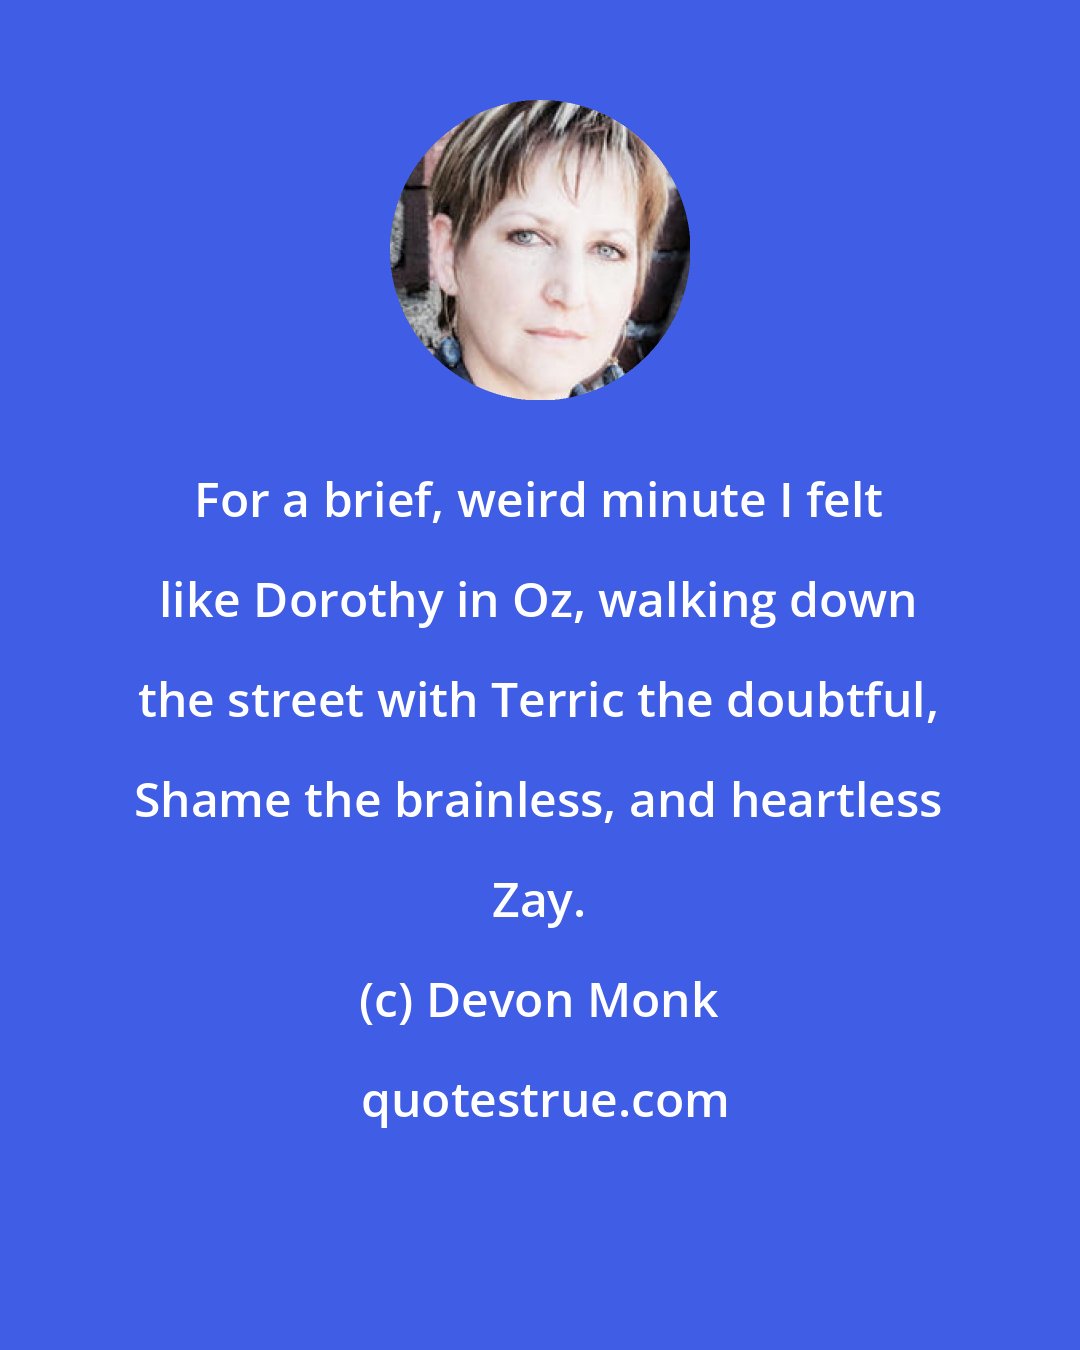 Devon Monk: For a brief, weird minute I felt like Dorothy in Oz, walking down the street with Terric the doubtful, Shame the brainless, and heartless Zay.